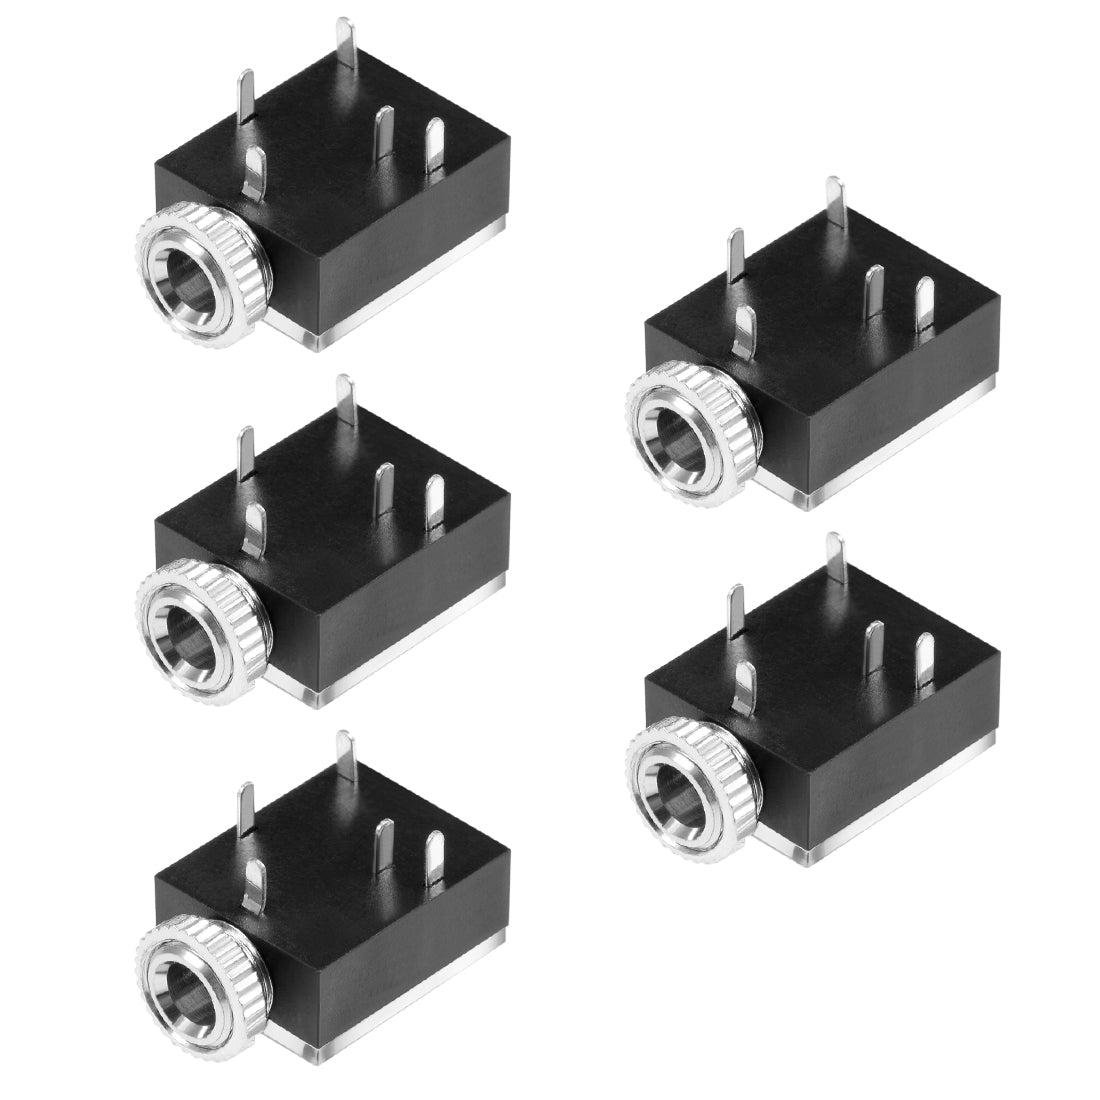 uxcell Uxcell 5Pcs PCB Mount 3.5mm 5 Pin Socket Headphone Stereo Jack Audio Video Connector Black PJ-324